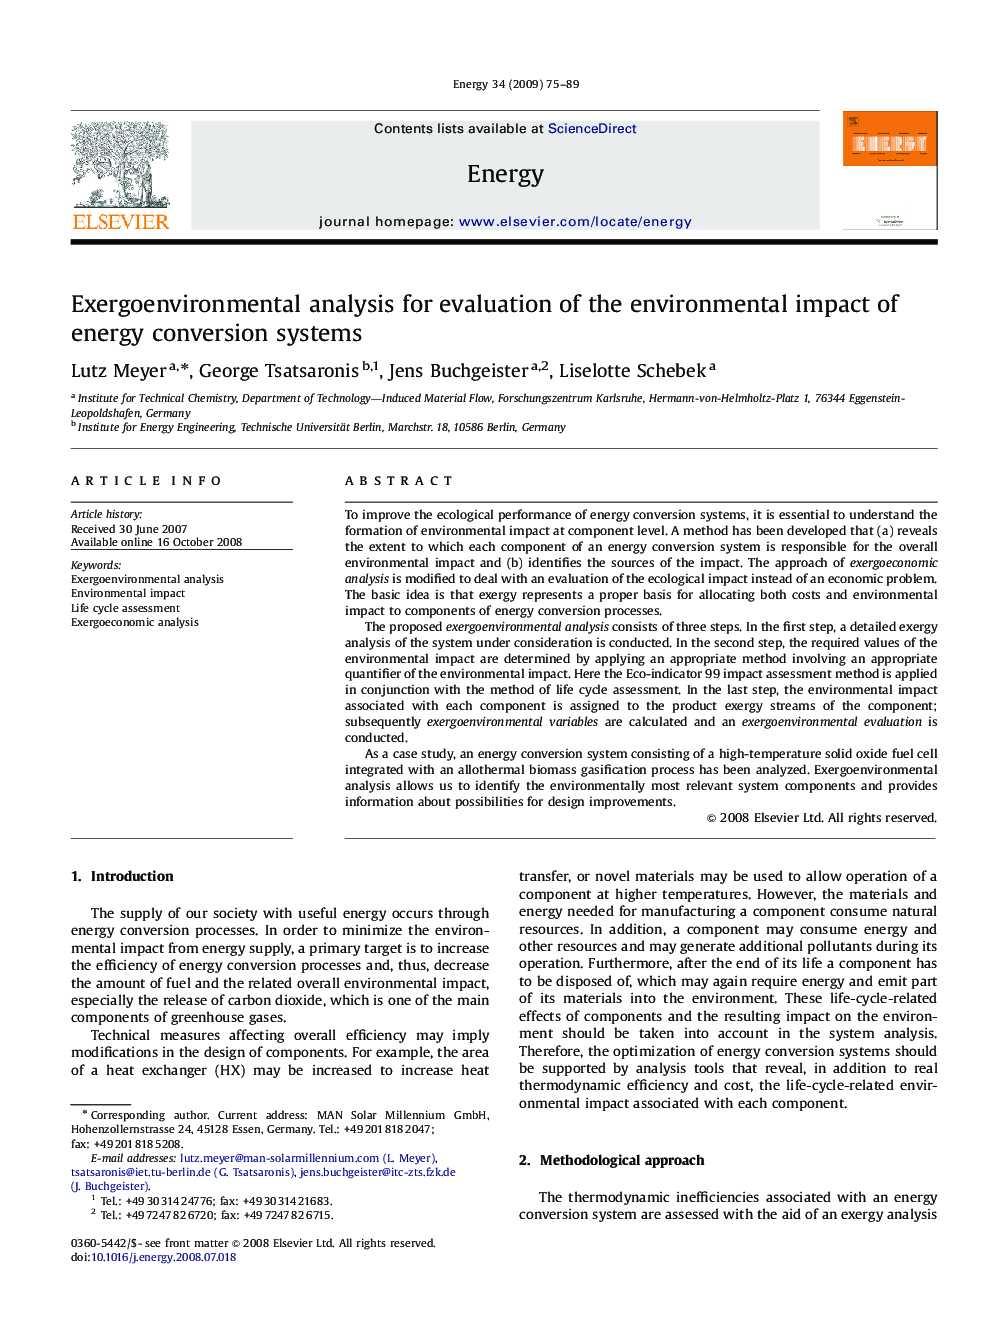 Exergoenvironmental analysis for evaluation of the environmental impact of energy conversion systems